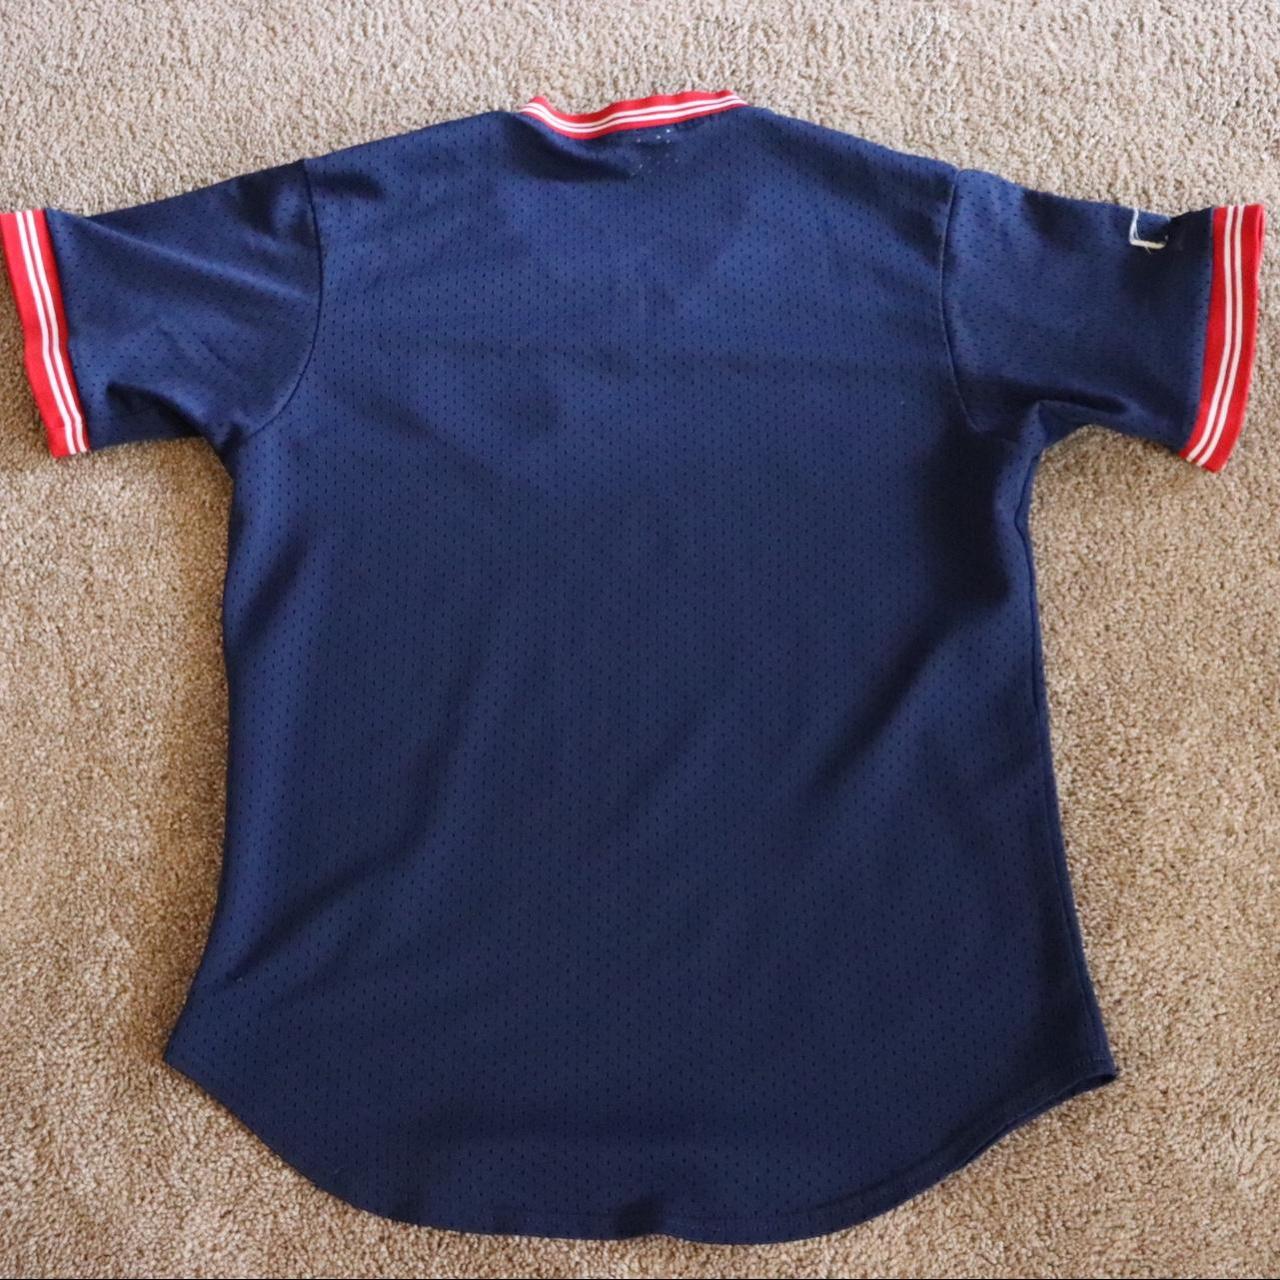 Cleveland Indians jersey. Youth XL. Will fit a - Depop